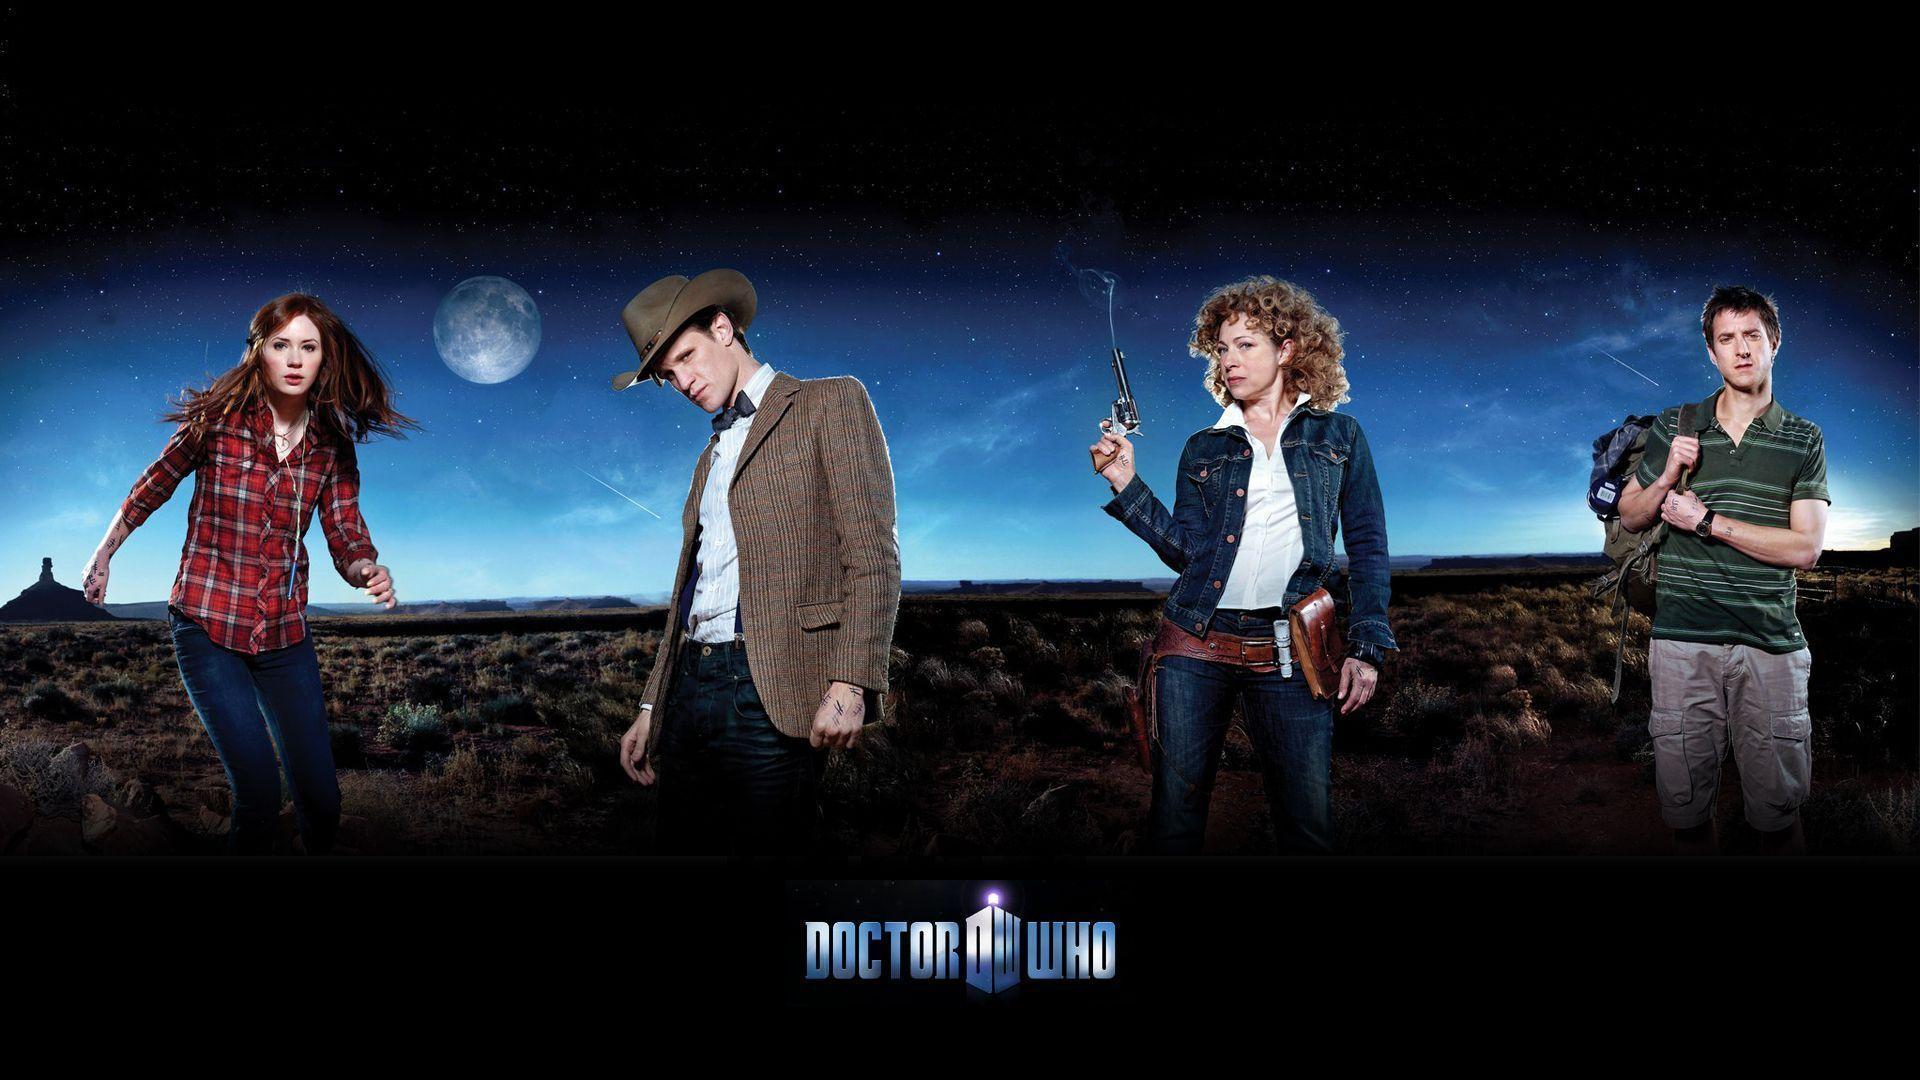 Doctor Who 2K Picture Wallpaper KDoctor Who 2K Picture Wallpapers